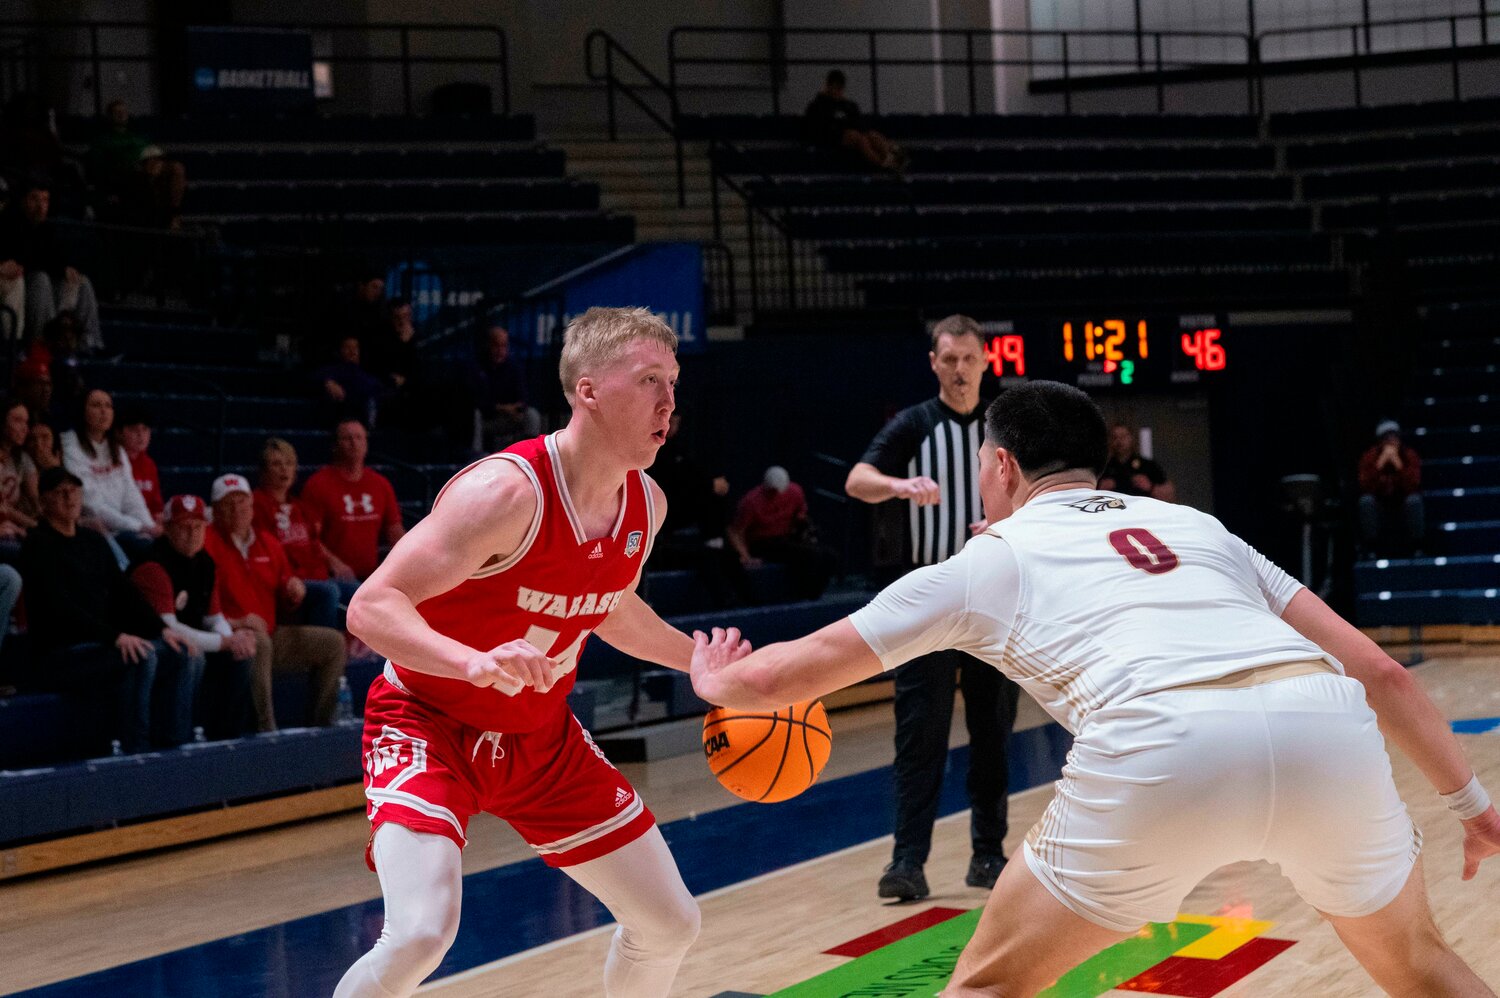 Wabash College Men’s basketball senior Sam Comer put together a great career with the Little Giants. The Danville Warrior turned Little Giant was a do-it-all player for Wabash and did whatever was necessary to win.